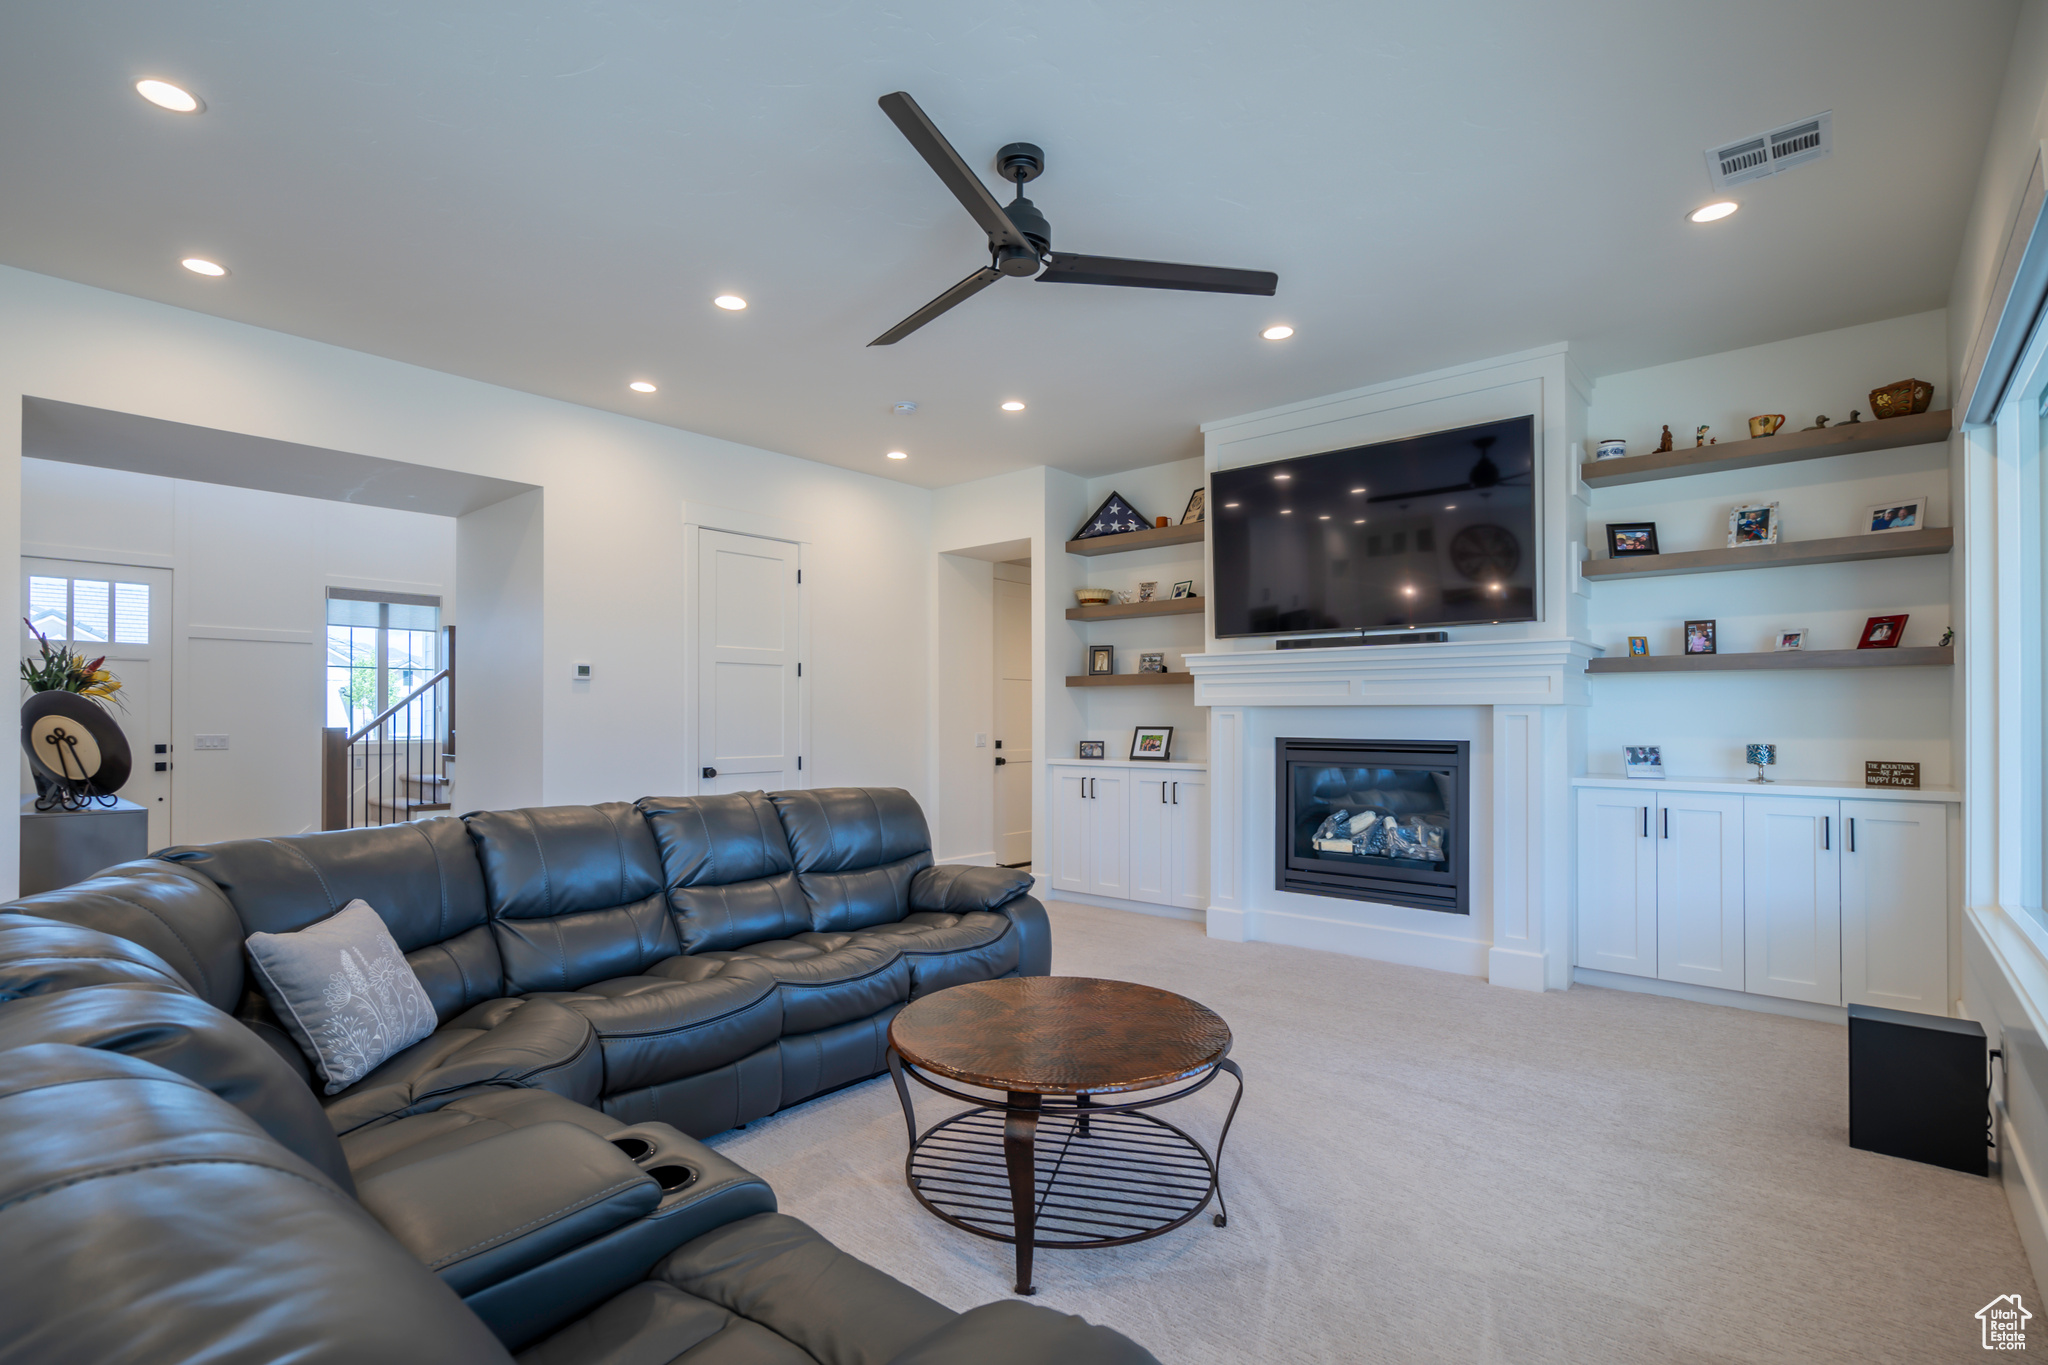 Carpeted living room with built in features and ceiling fan